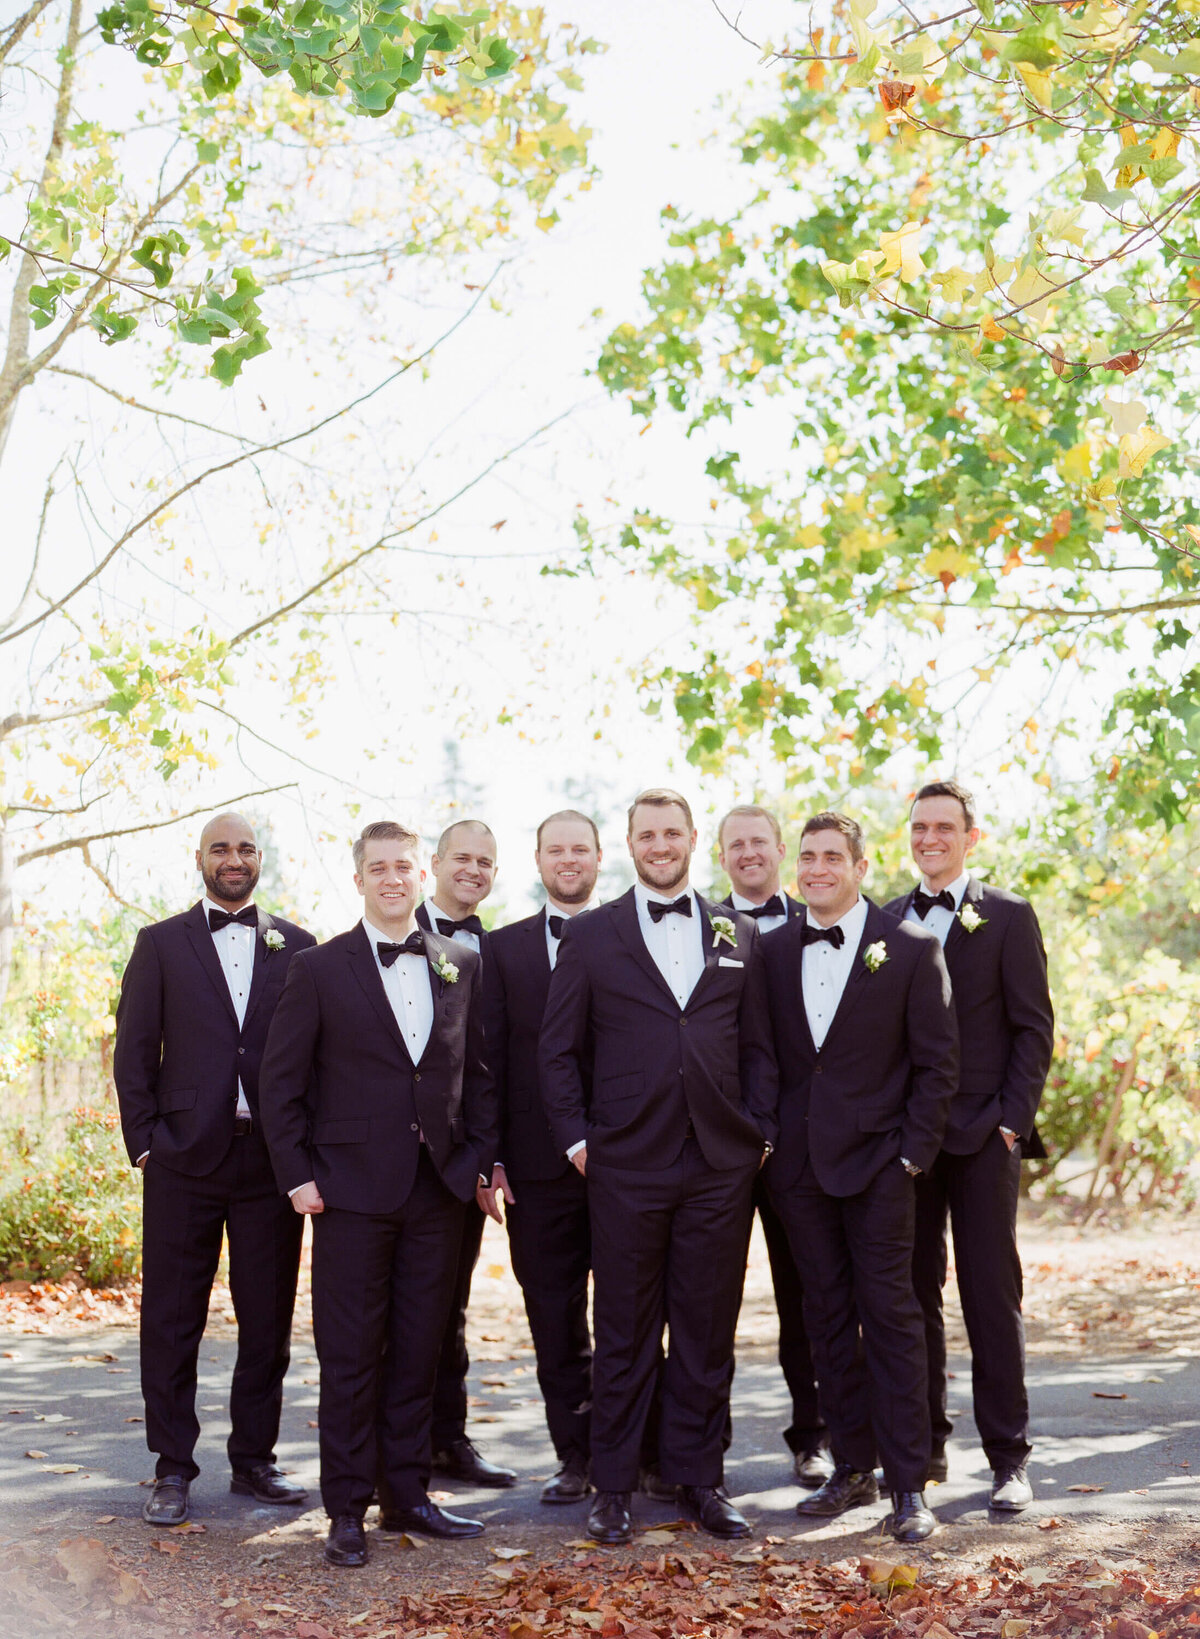 Groom-to-be poses with his best men in suit and bow tie under beautiful green trees and dried autumn leaves.